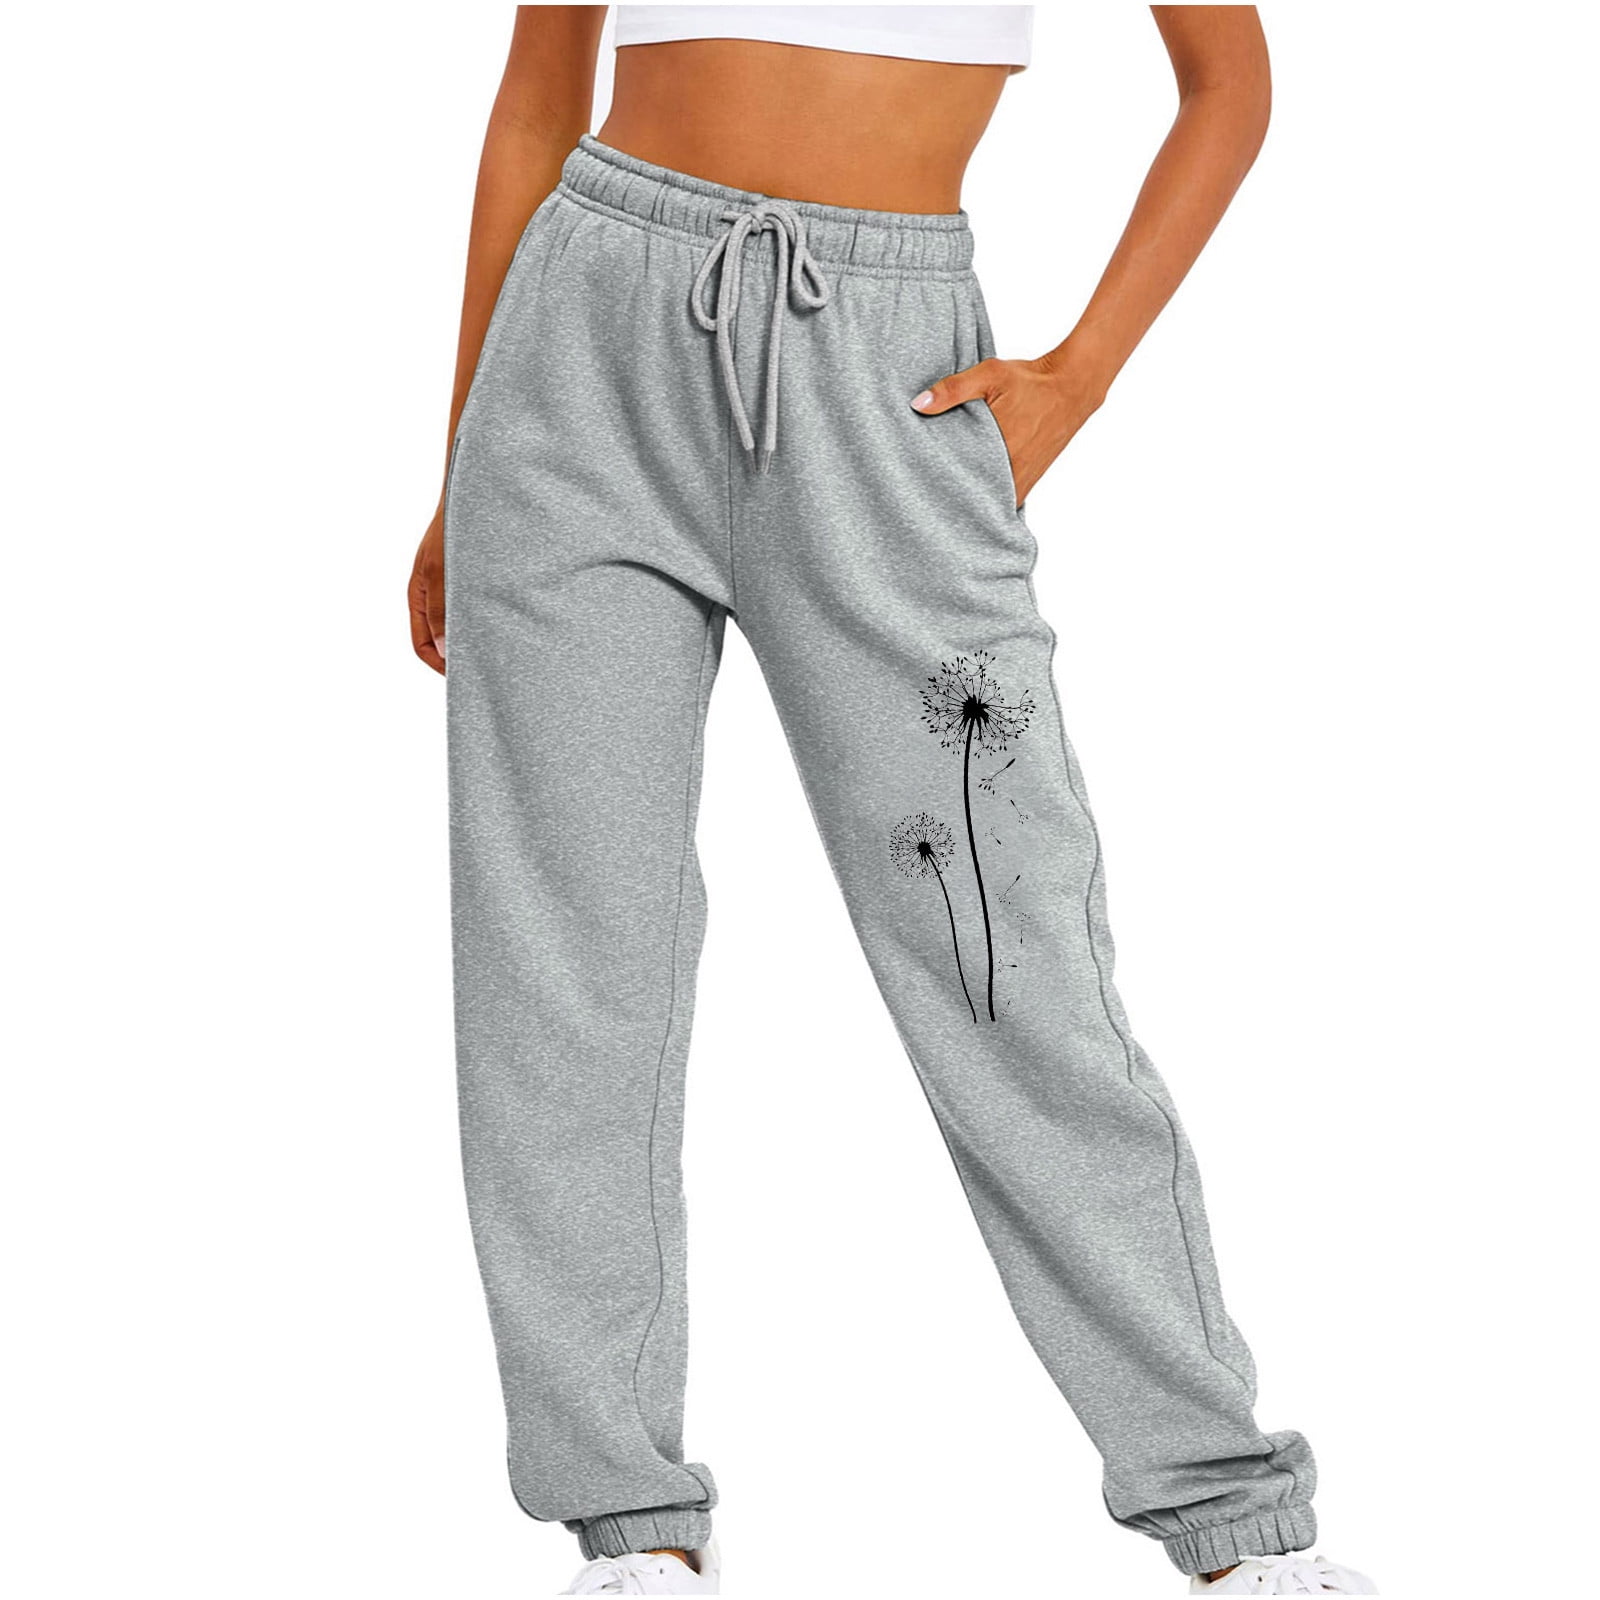 Women's Casual Tapered Sweatpants Drawstring Elastic Waist Pants Printed  Breathable Straight Active Lounge Pants